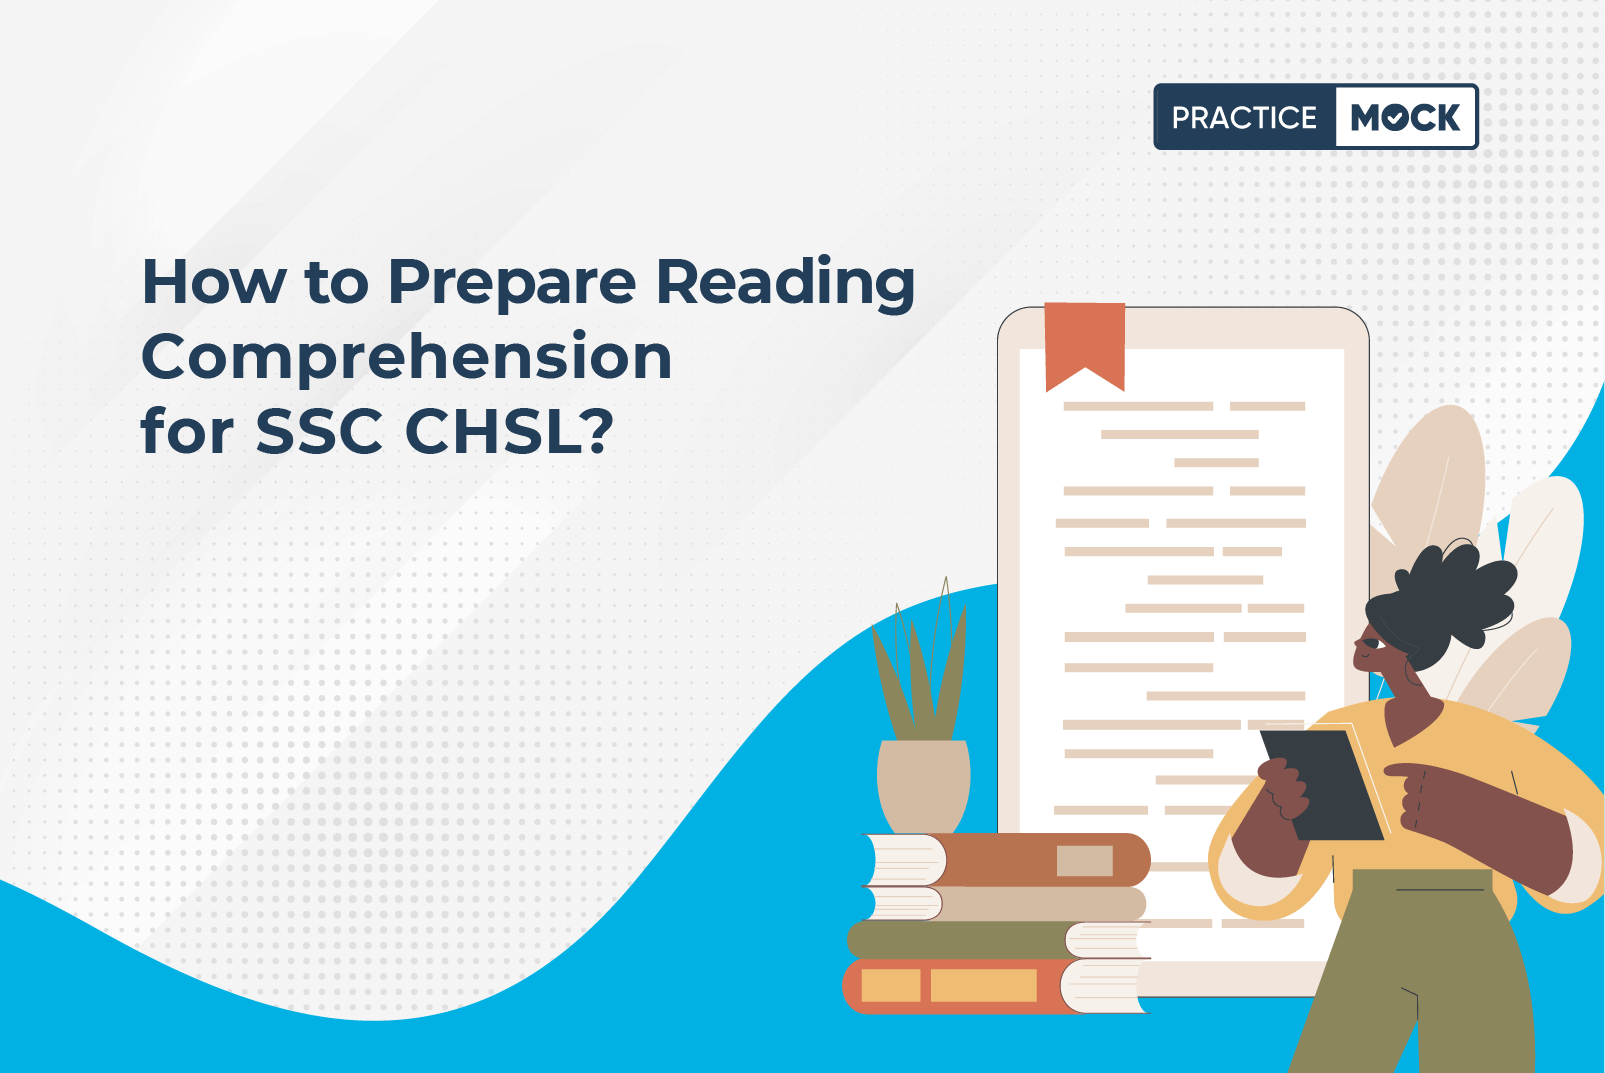 How to Prepare Reading Comprehension for SSC CHSL